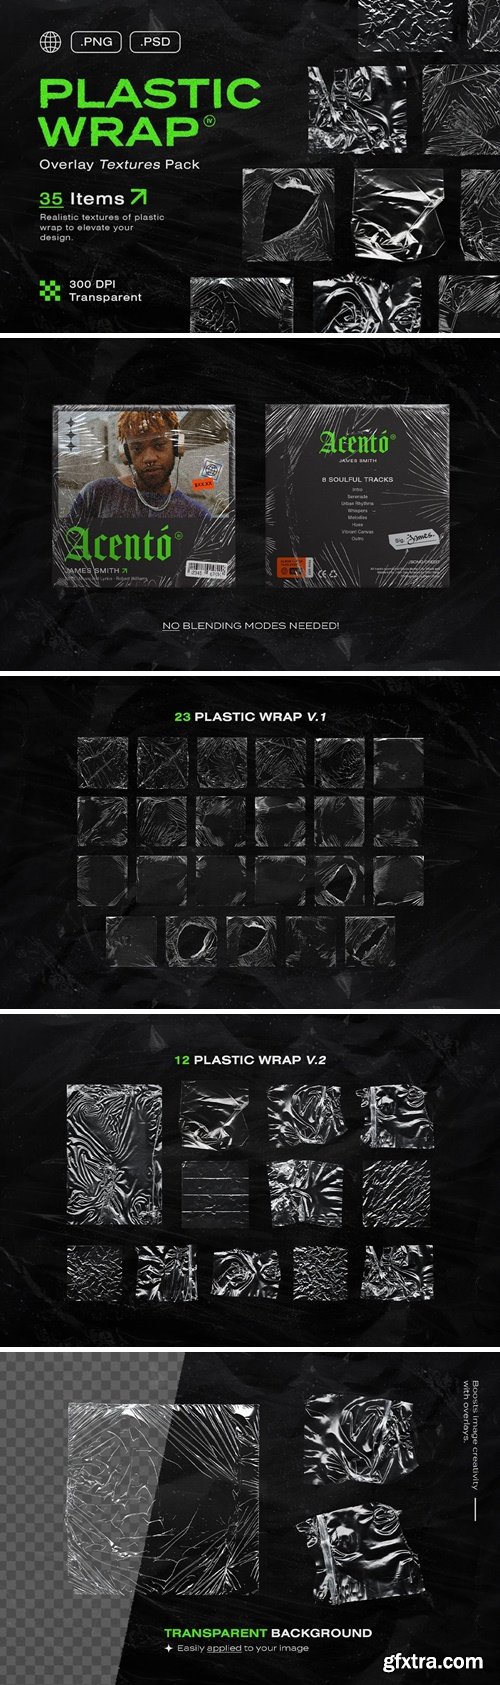 Plastic Wrap Overlay Textures Pack 4EQWLNH